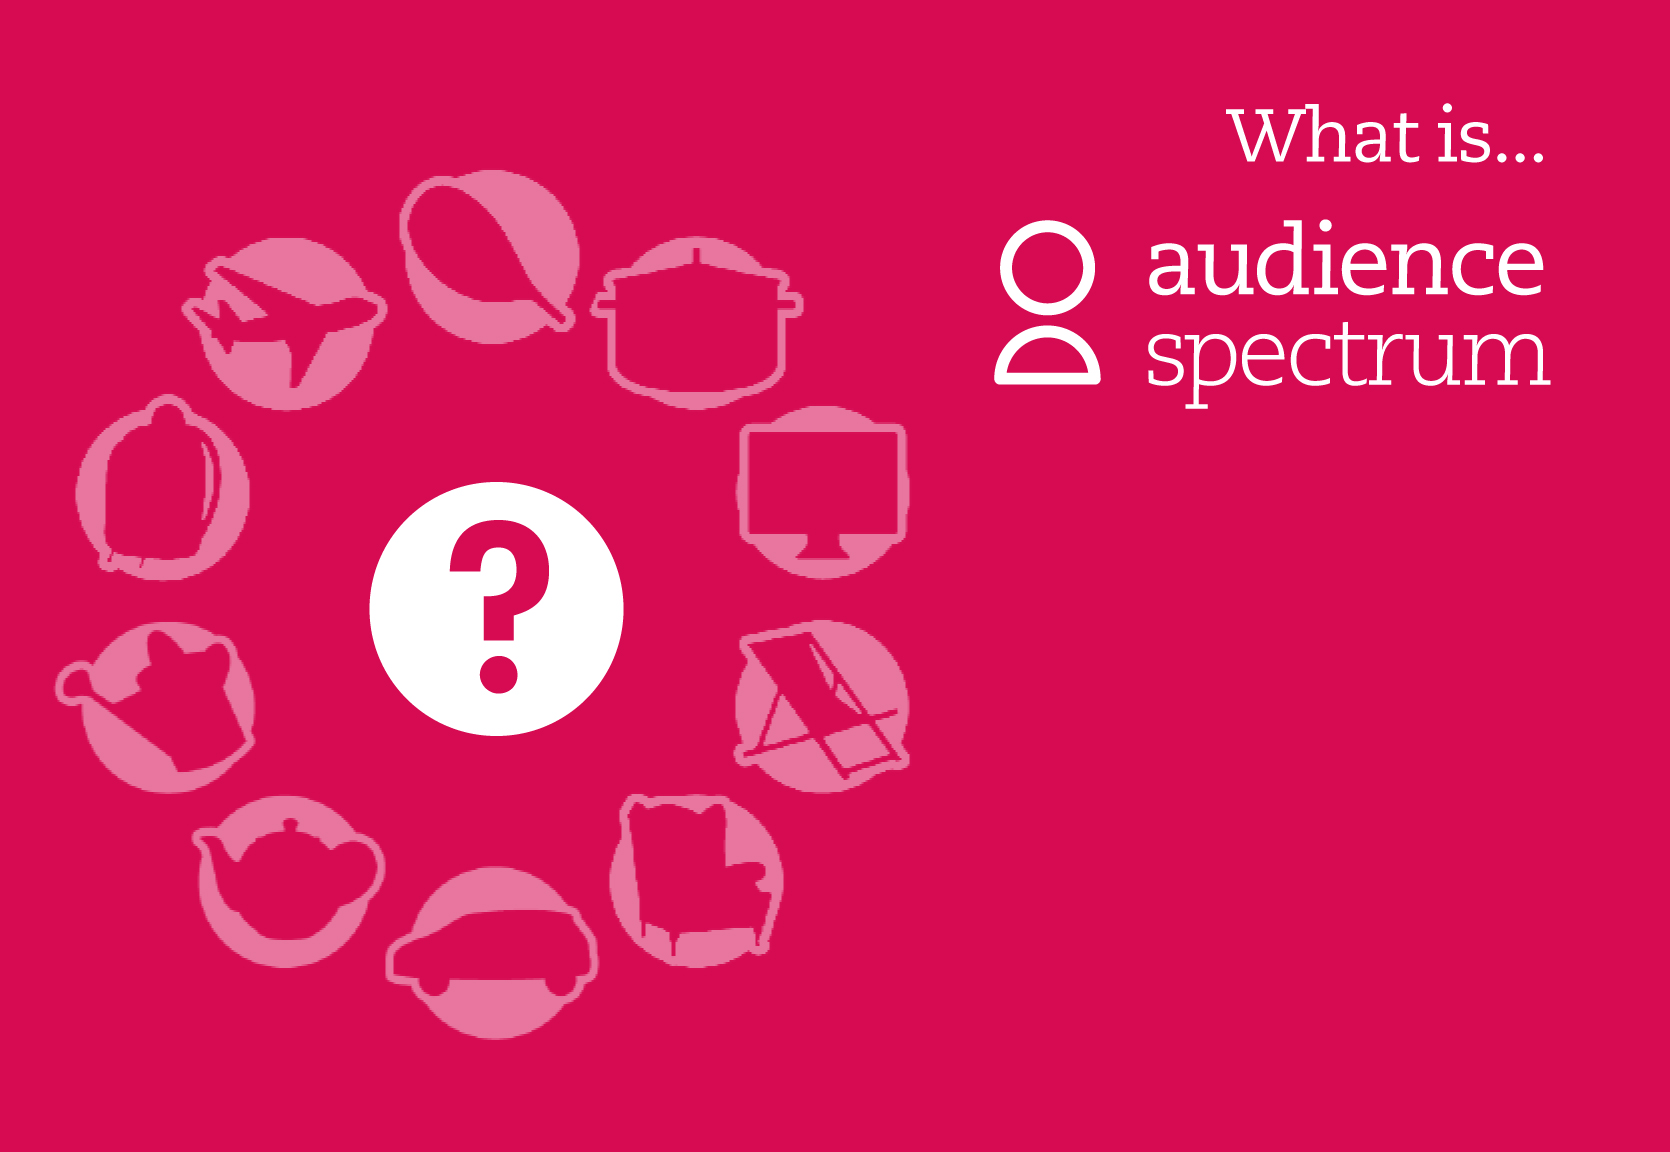 Audience Spectrum is a powerful segmentation tool for the cultural sector. It segments the whole UK population by their attitudes towards culture, and by what they like to see and do. There are 10 different Audience Spectrum profiles you can use to understand who lives in your local area, what your current audiences are like, and what you could do to build new ones. Audience Spectrum is an accurate tool to help the sector target audiences, addressing both behaviour and geography.